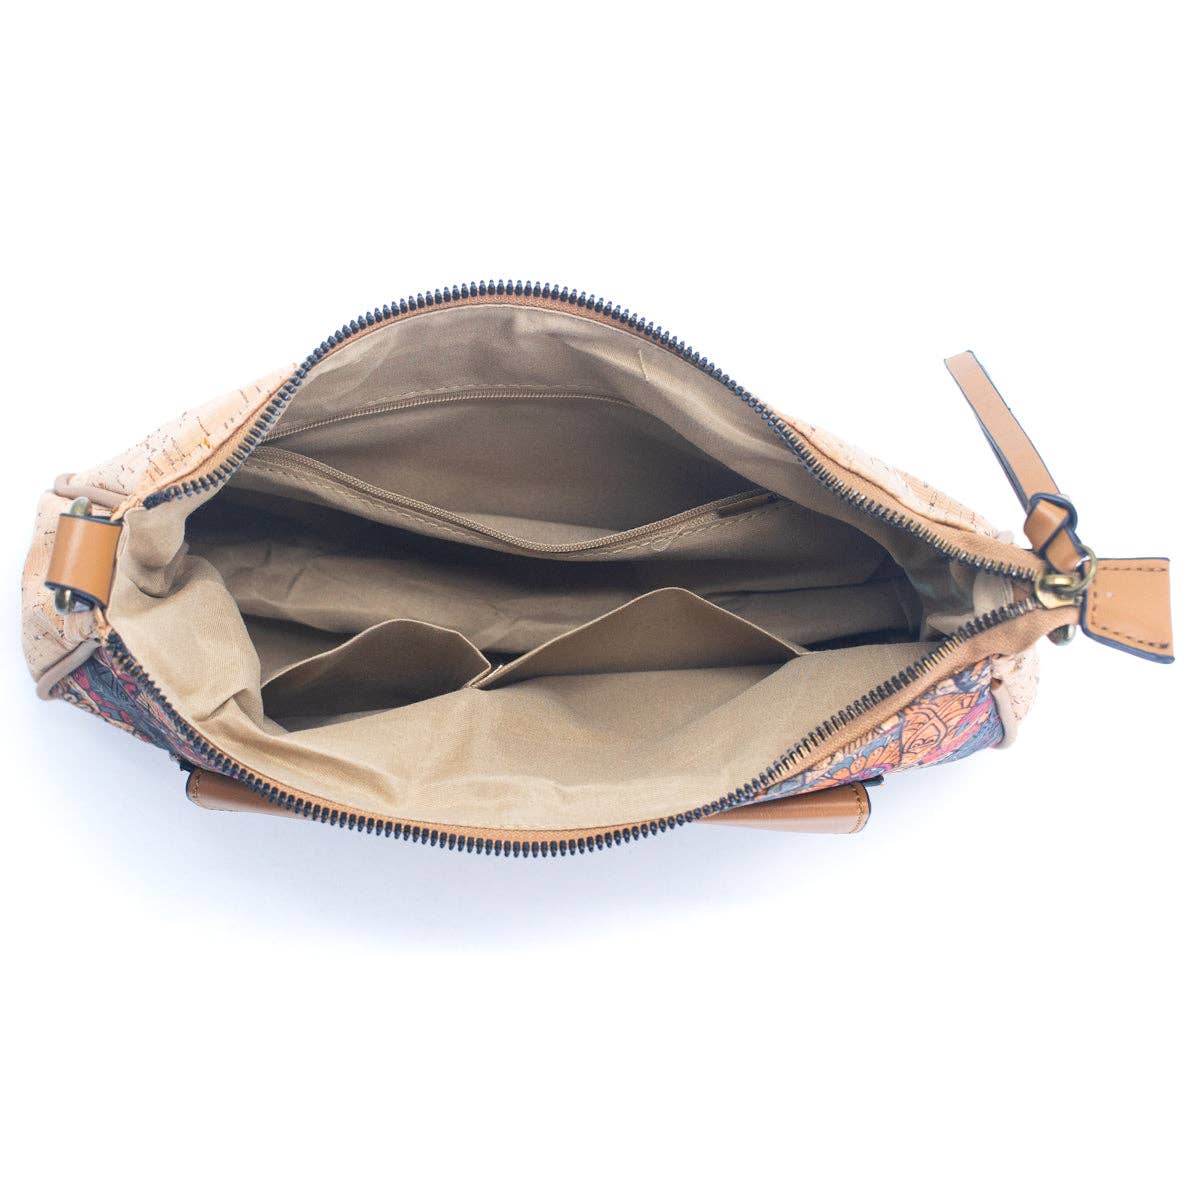 Natural Cork Printed Pattern Women's Messenger Bag | THE CORK COLLECTION